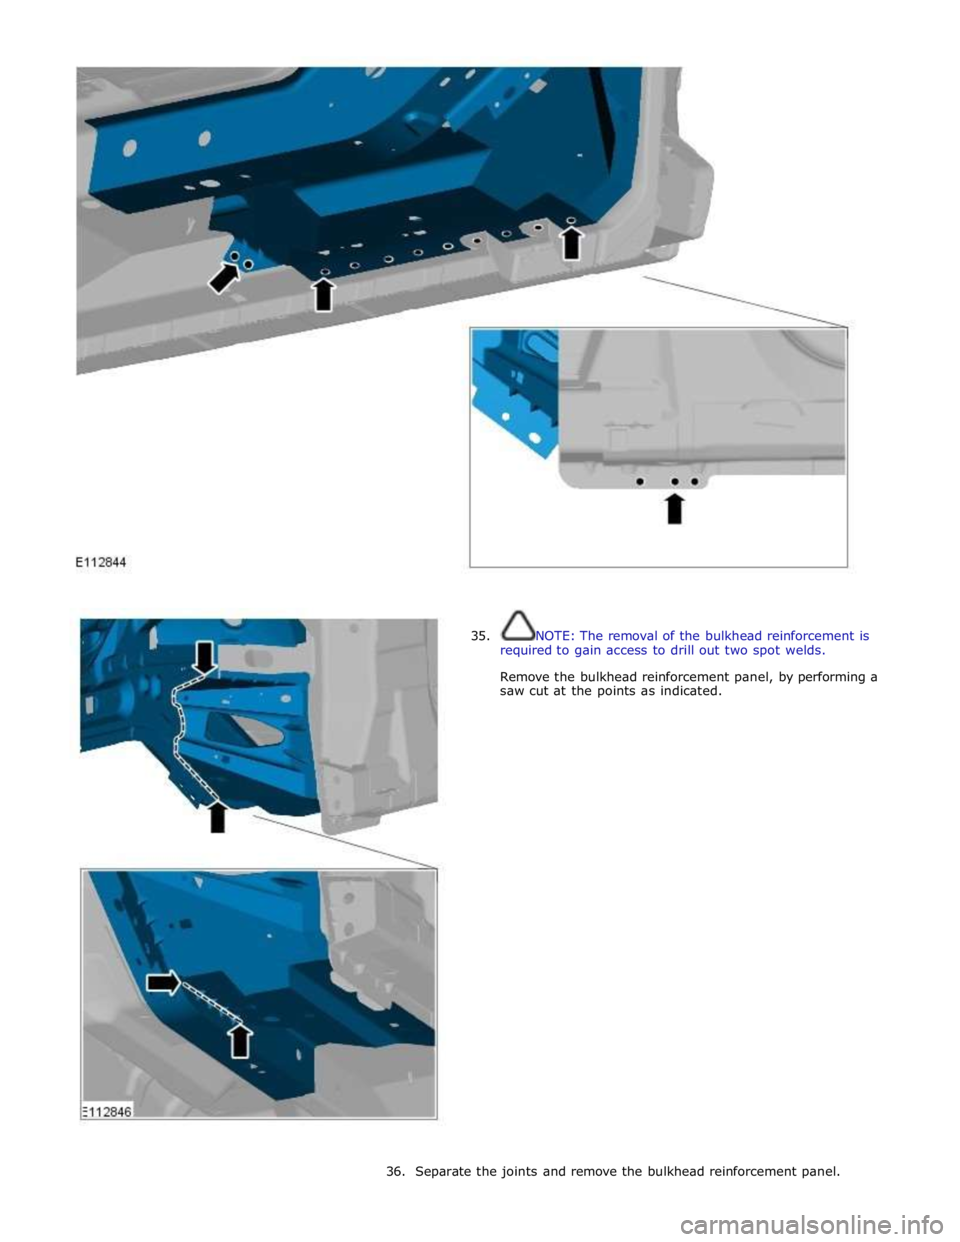 JAGUAR XFR 2010 1.G Workshop Manual  
 
 
 
35. NOTE: The removal of the bulkhead reinforcement is 
required to gain access to drill out two spot welds. 
 
Remove the bulkhead reinforcement panel, by performing a 
saw cut at the points 